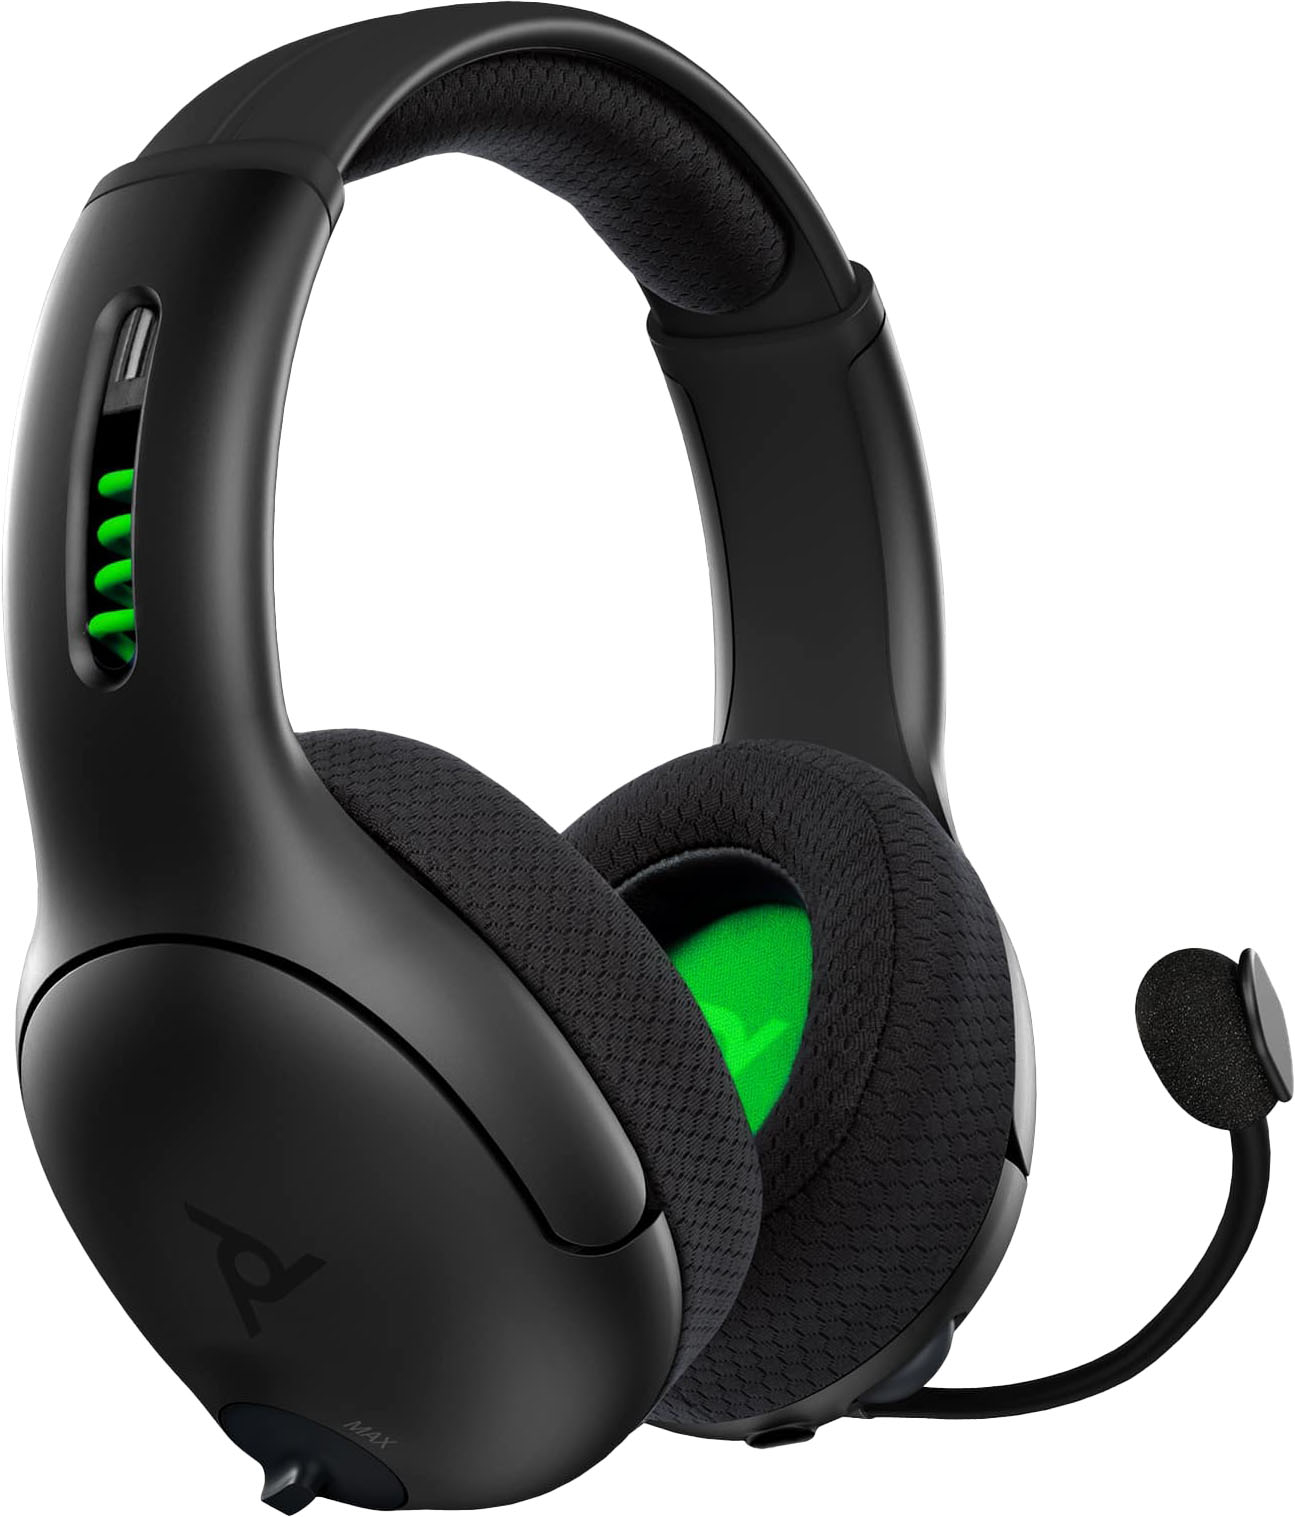 Angle View: PDP - LVL50 Wireless Stereo Gaming Headset for Xbox - Black